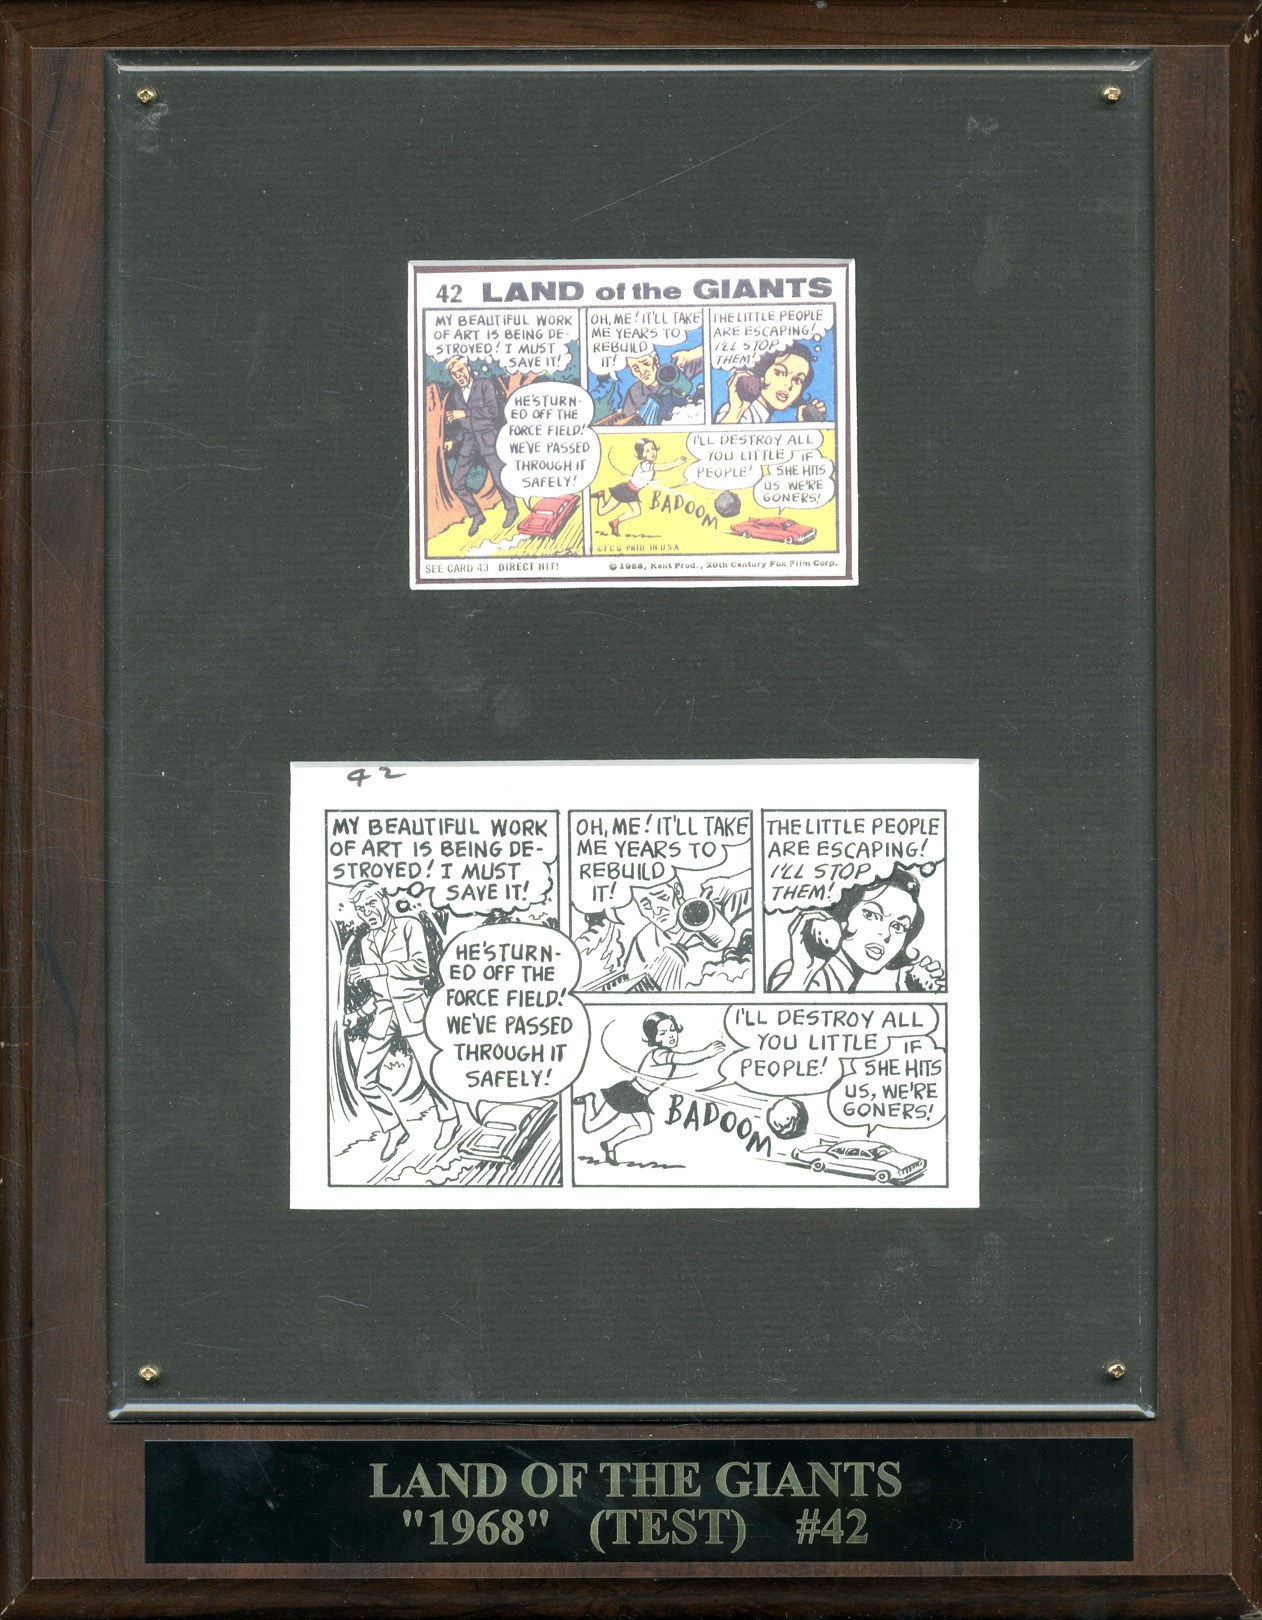 Baseball and Trading Cards - 1968 Topps Land of the Giants Original Artwork